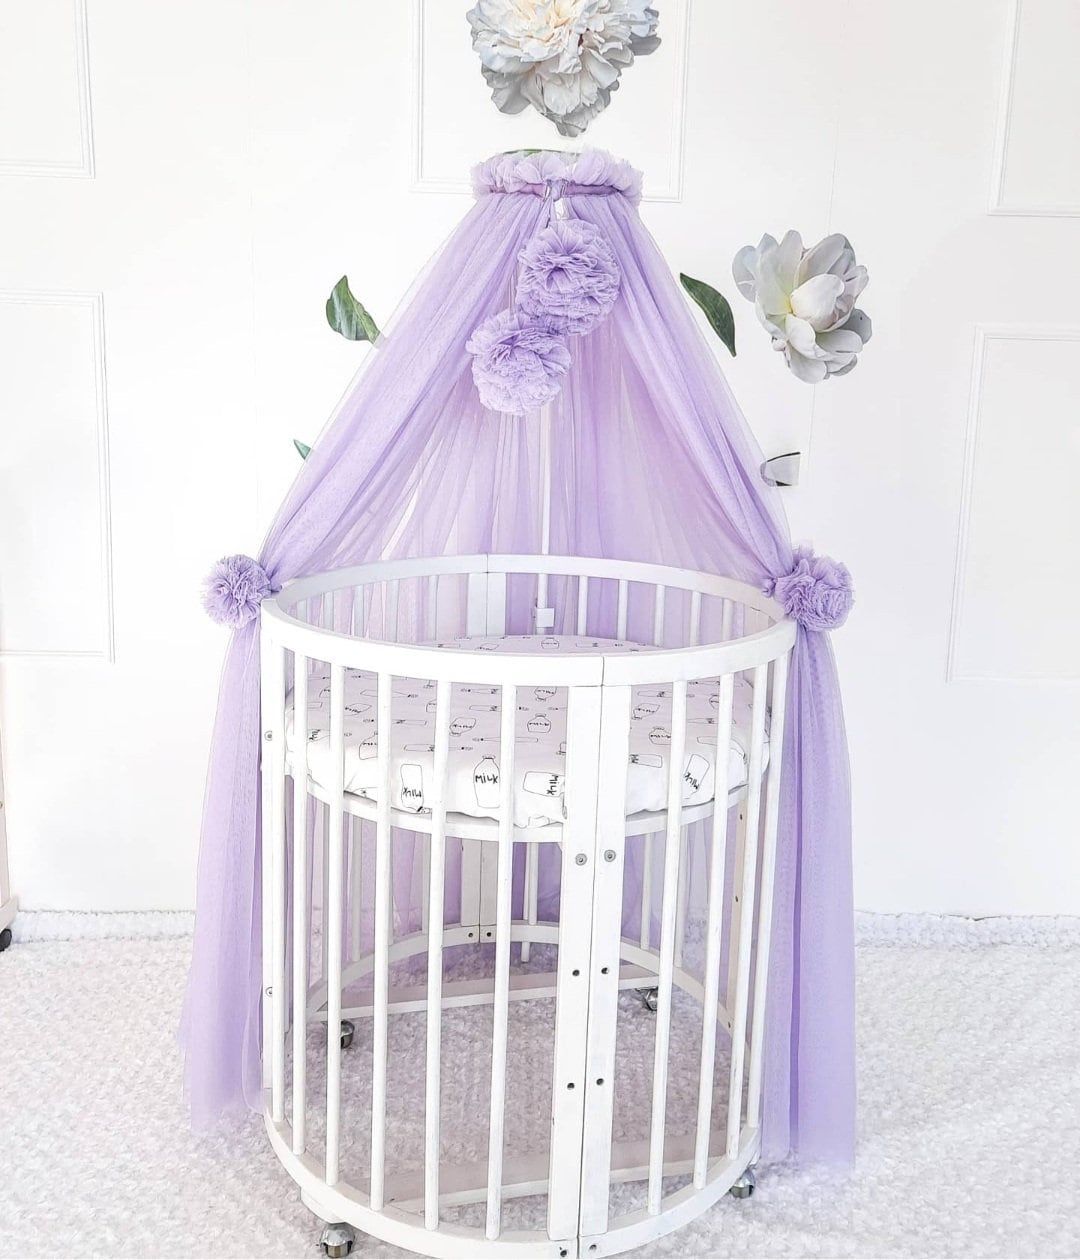 Canopy Bed tulle for nursery / Kids hanging tent for bedroom / Princess playhouse / Pom Pom canopy